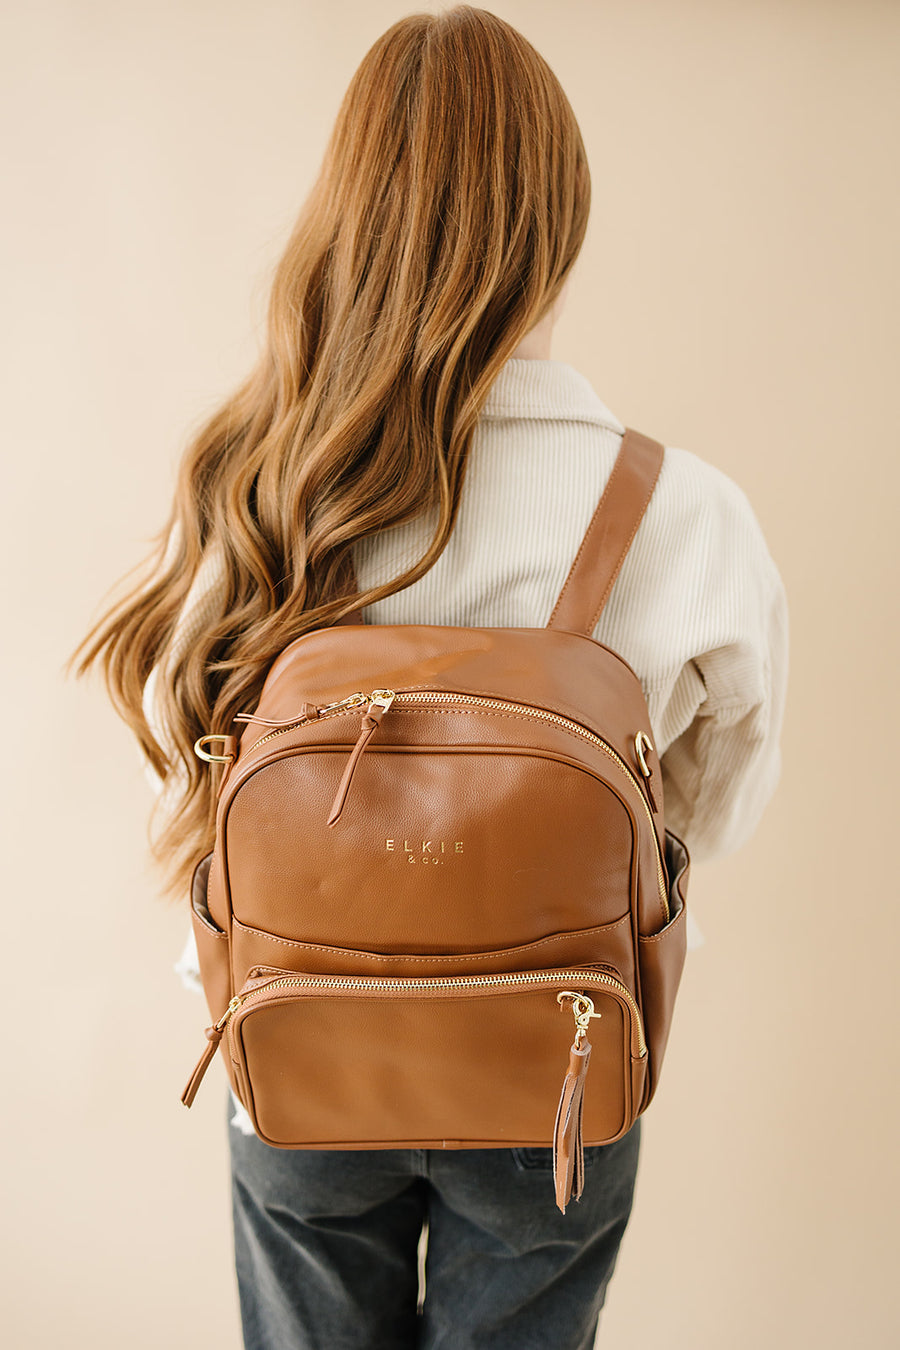 Ekie Co Saddle Aspen Midi being worn as a backpack